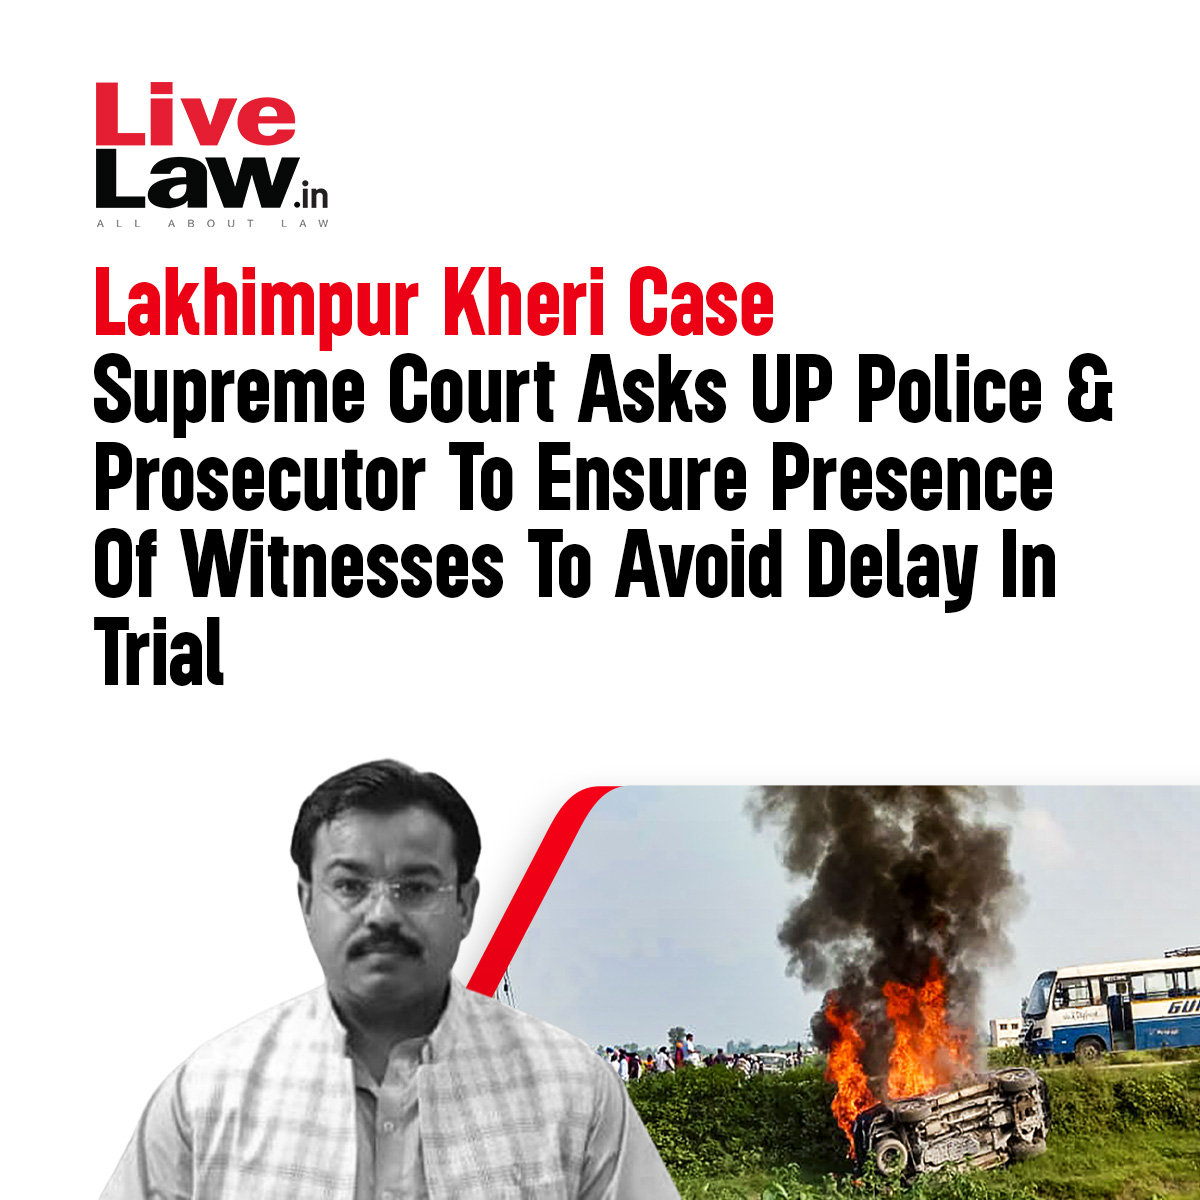 The Supreme Court (on April 22), while hearing Ashish Mishra's bail plea in connection with the Lakhimpur Kheri incident, observed in its order that the public prosecutor and the local police need to take effective steps to ensure the presence of witnesses during Ashish Mishra's